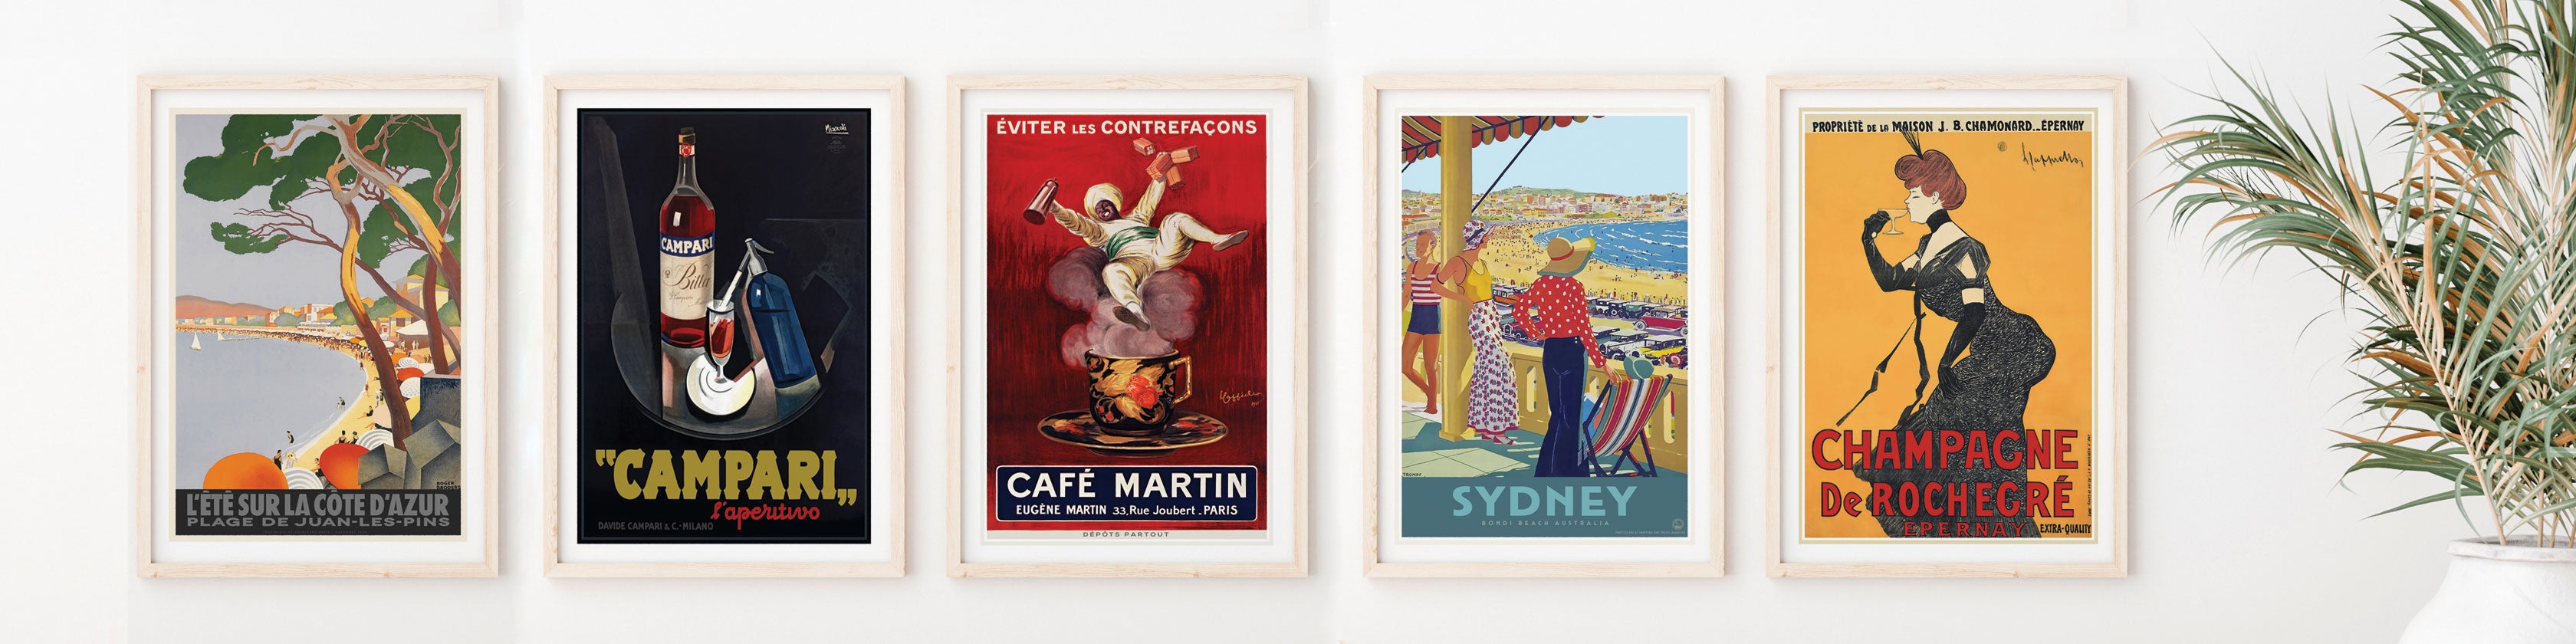 Huge range of vintage retro posters and framed prints from Places We Luv